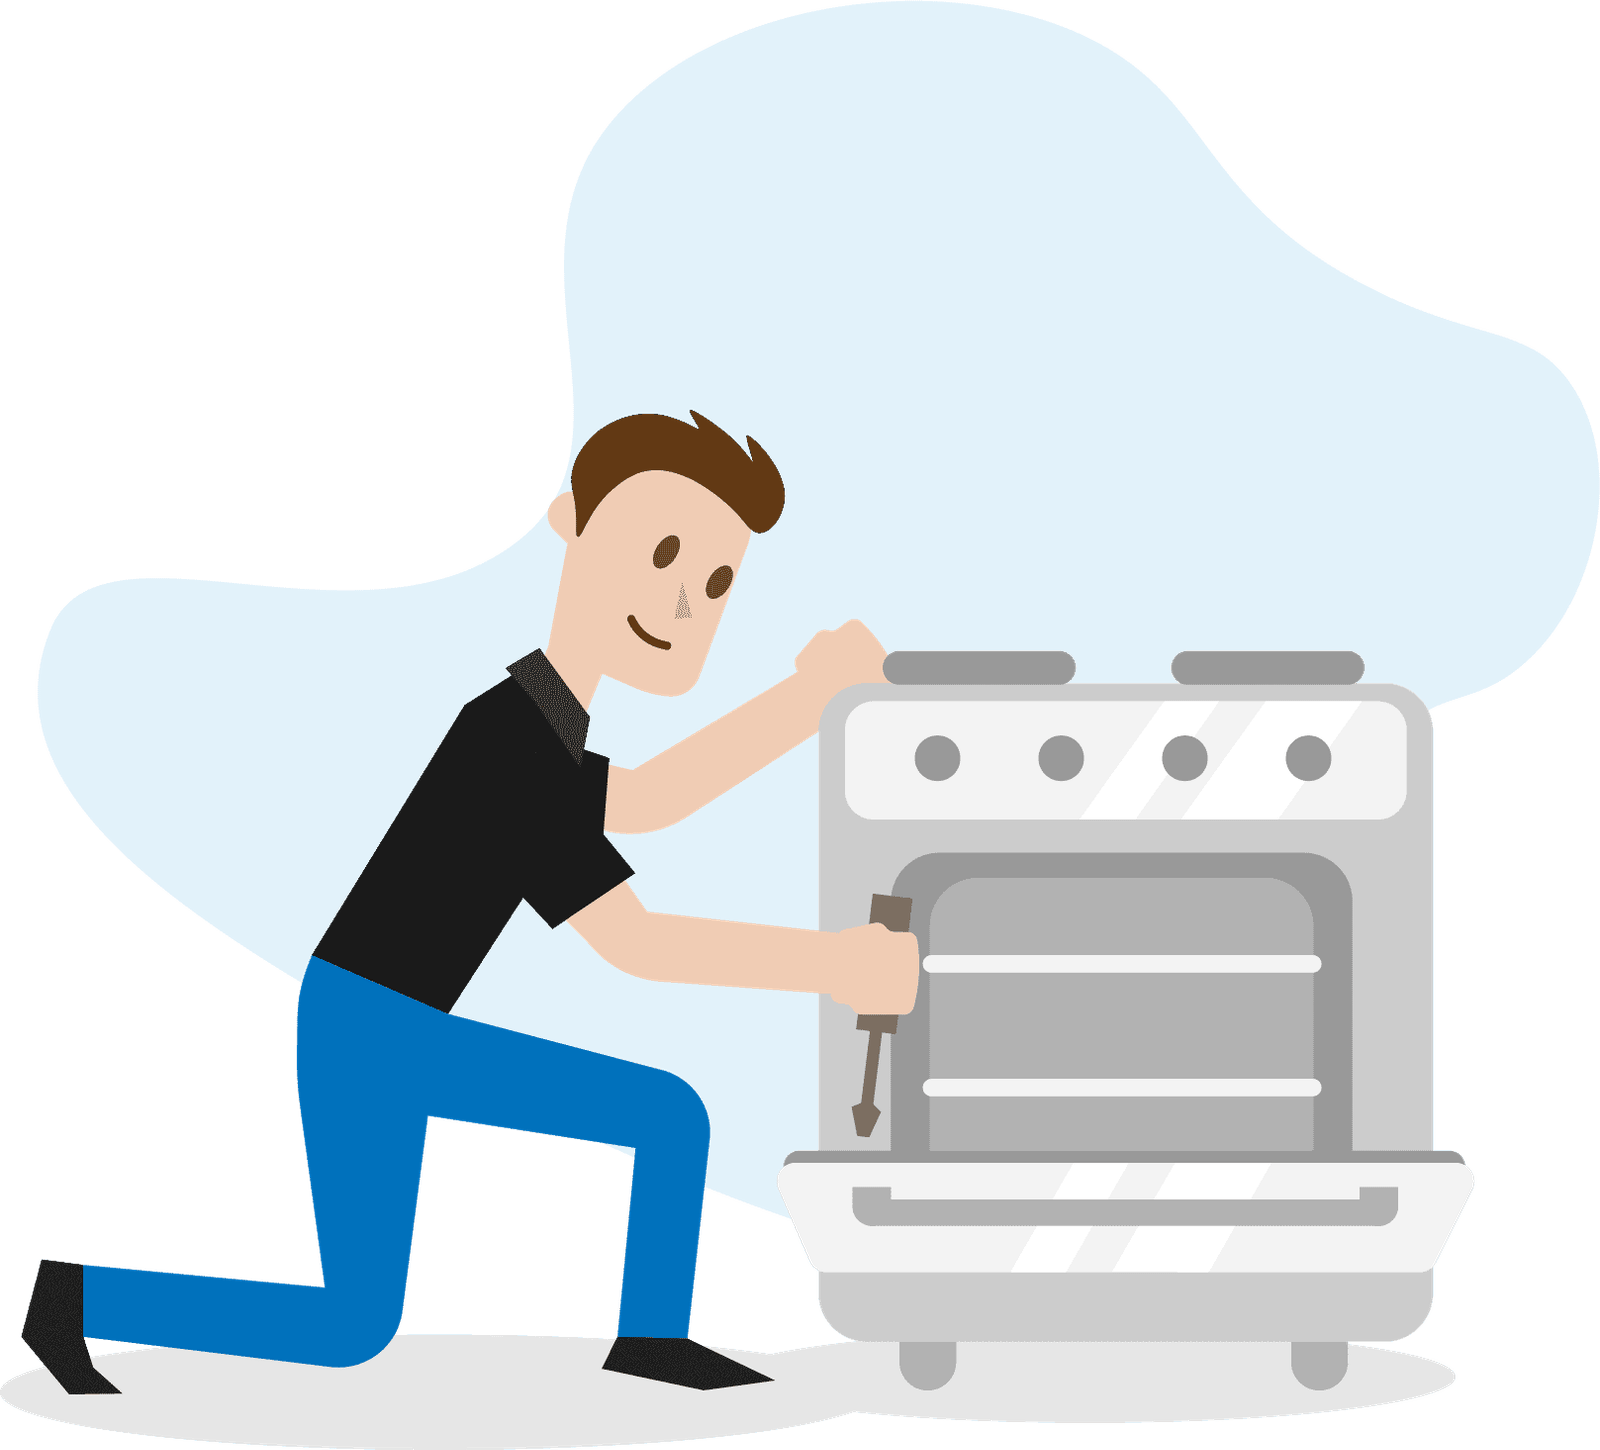 touching a hot stove clipart